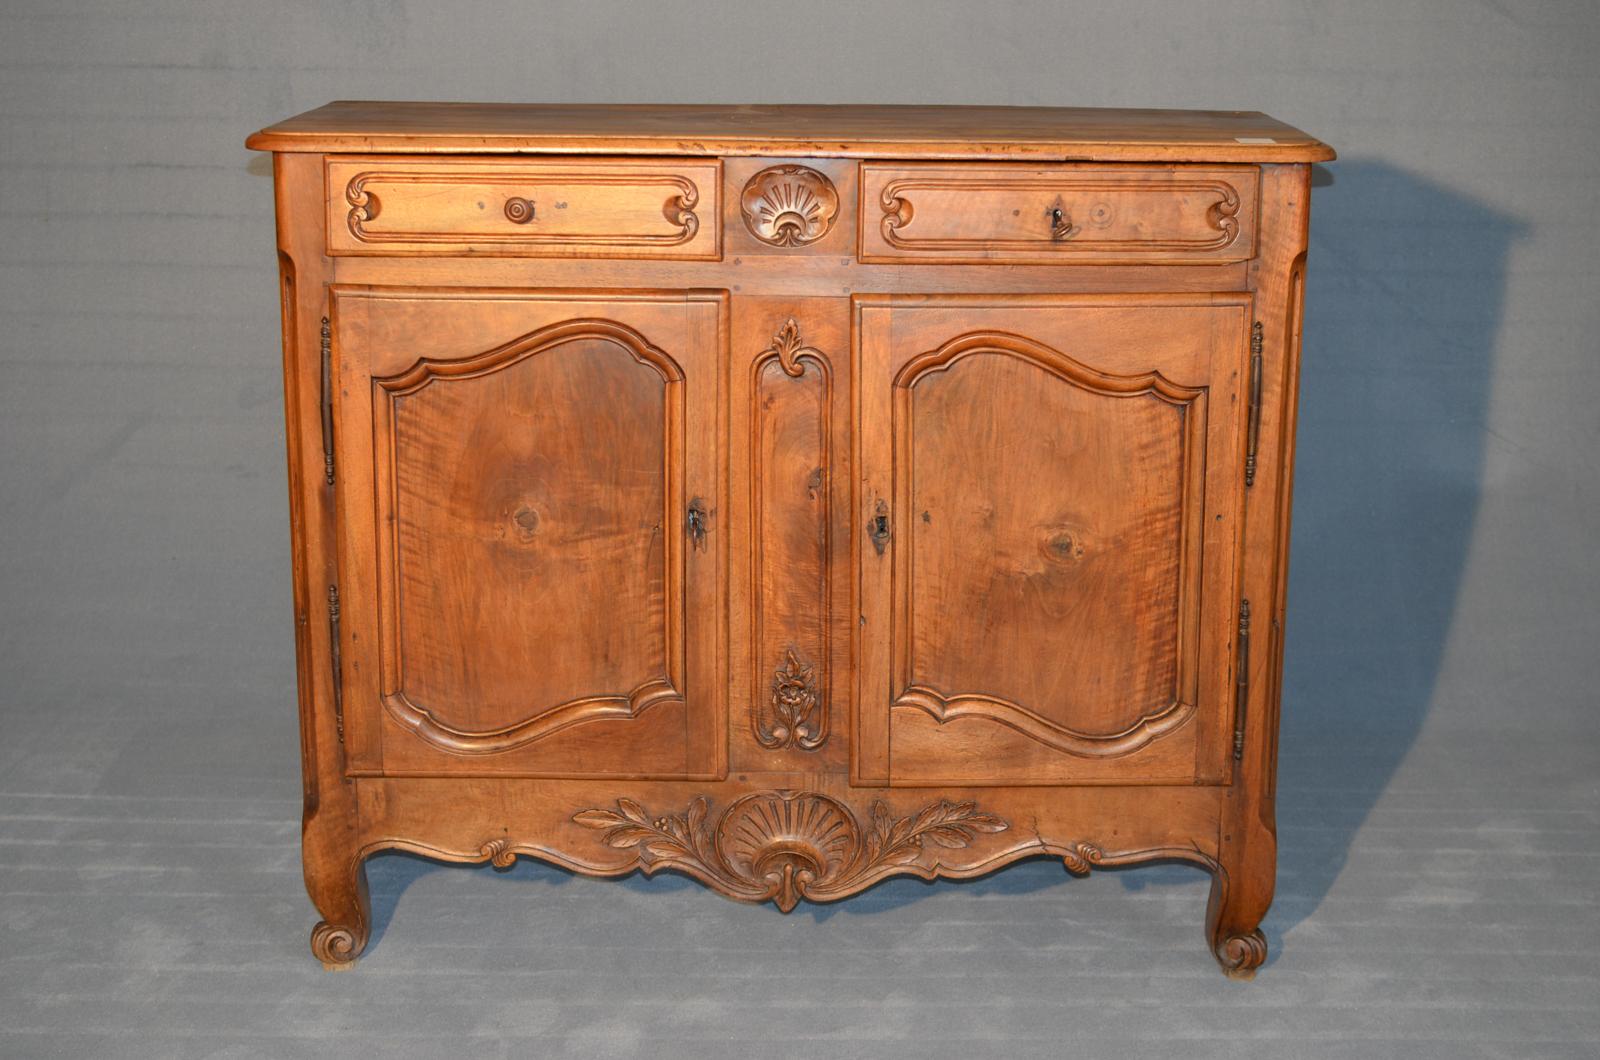 Louis XV sideboard in blond walnut of French origin more precisely of Lyon dated 1770. The sideboard has two upper drawers and lower doors with a single shelf inside. The locks and the two keys are completely original but we advise to revise the